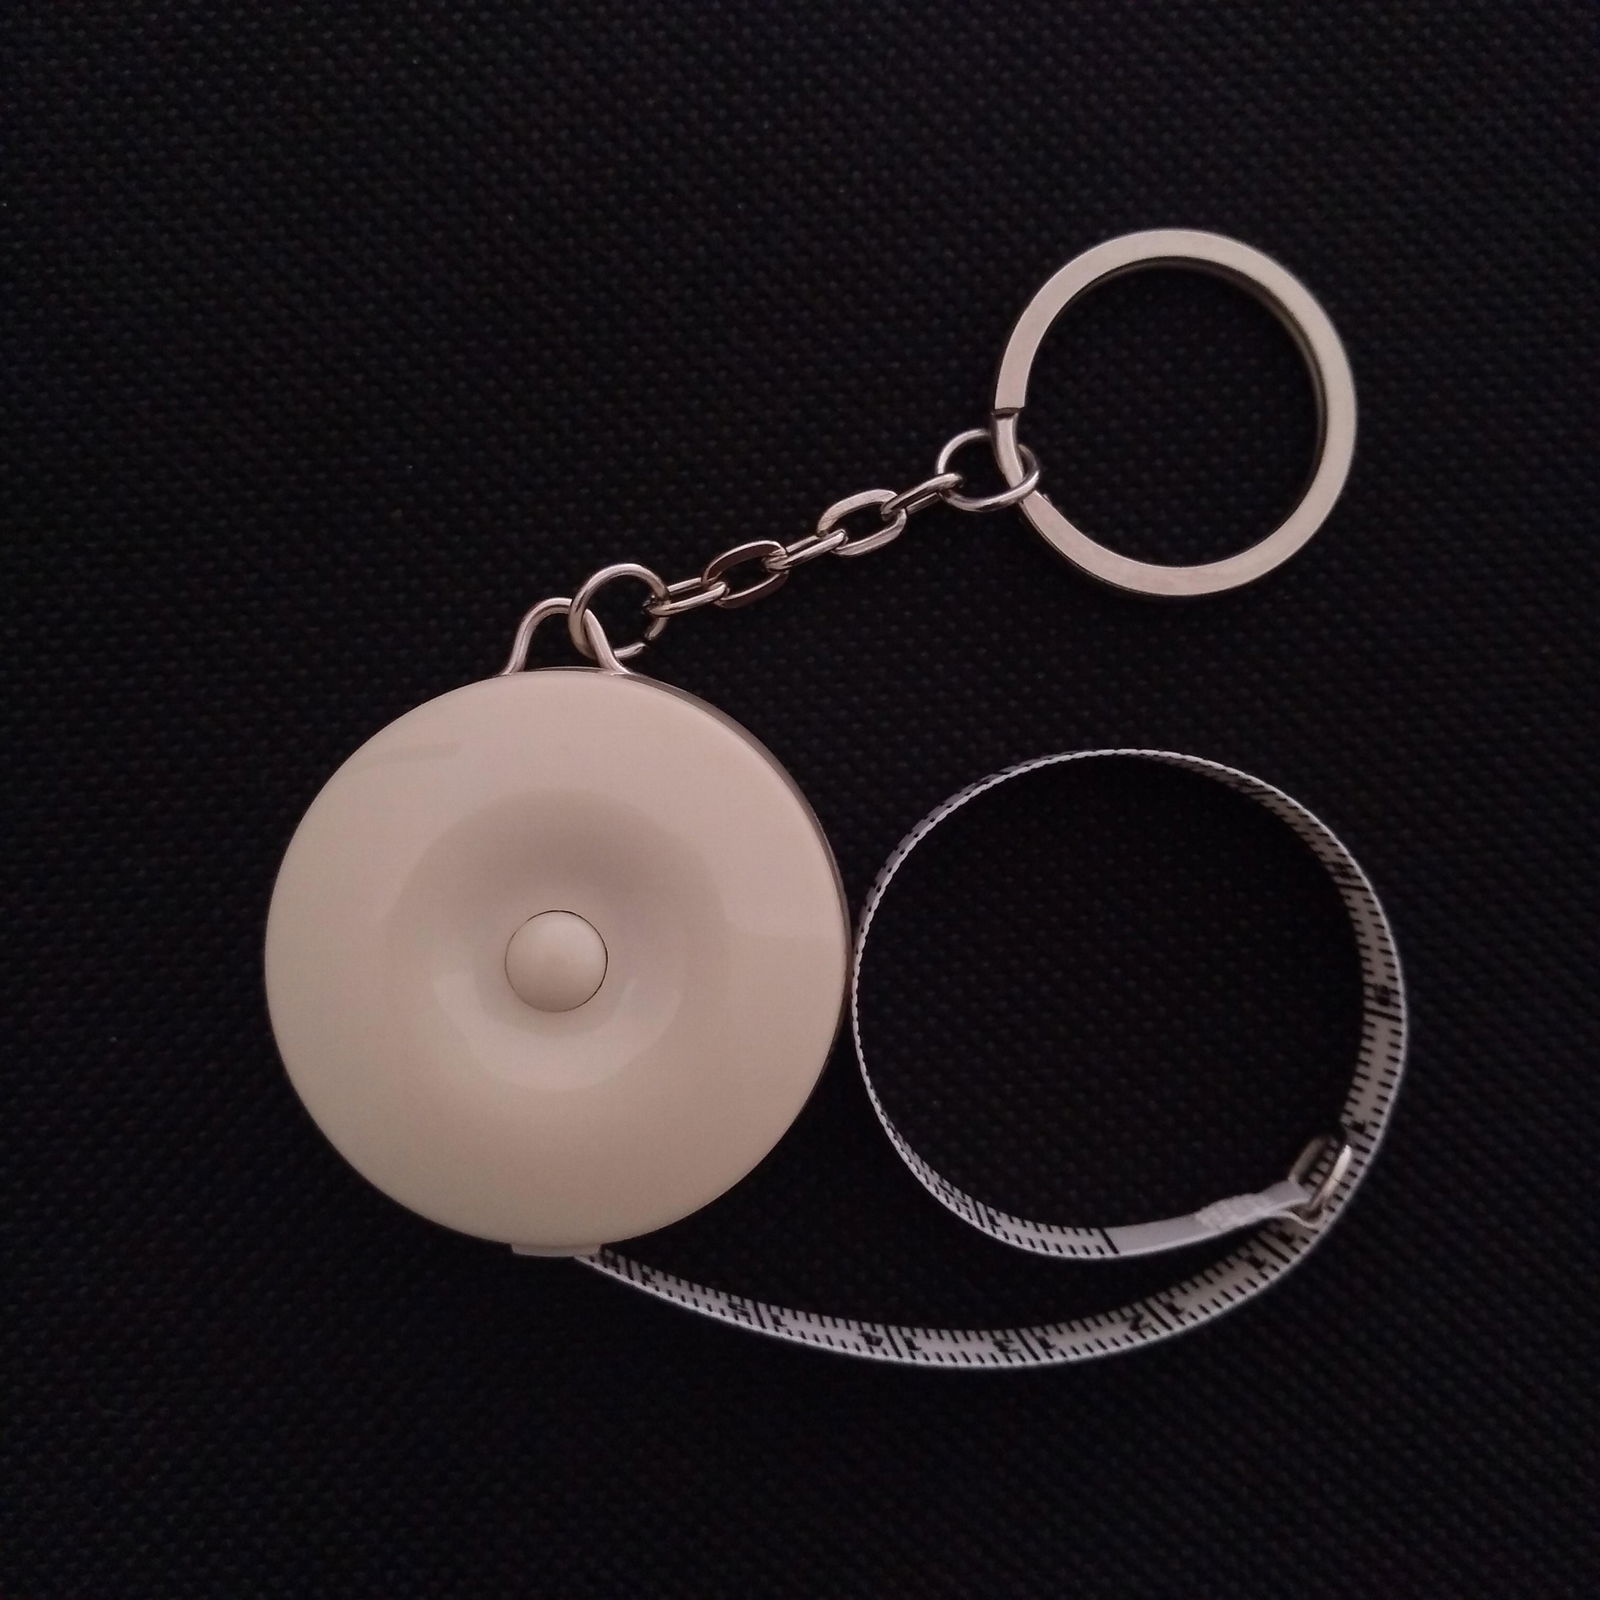 Keychain measuring tape for promotion gift 2